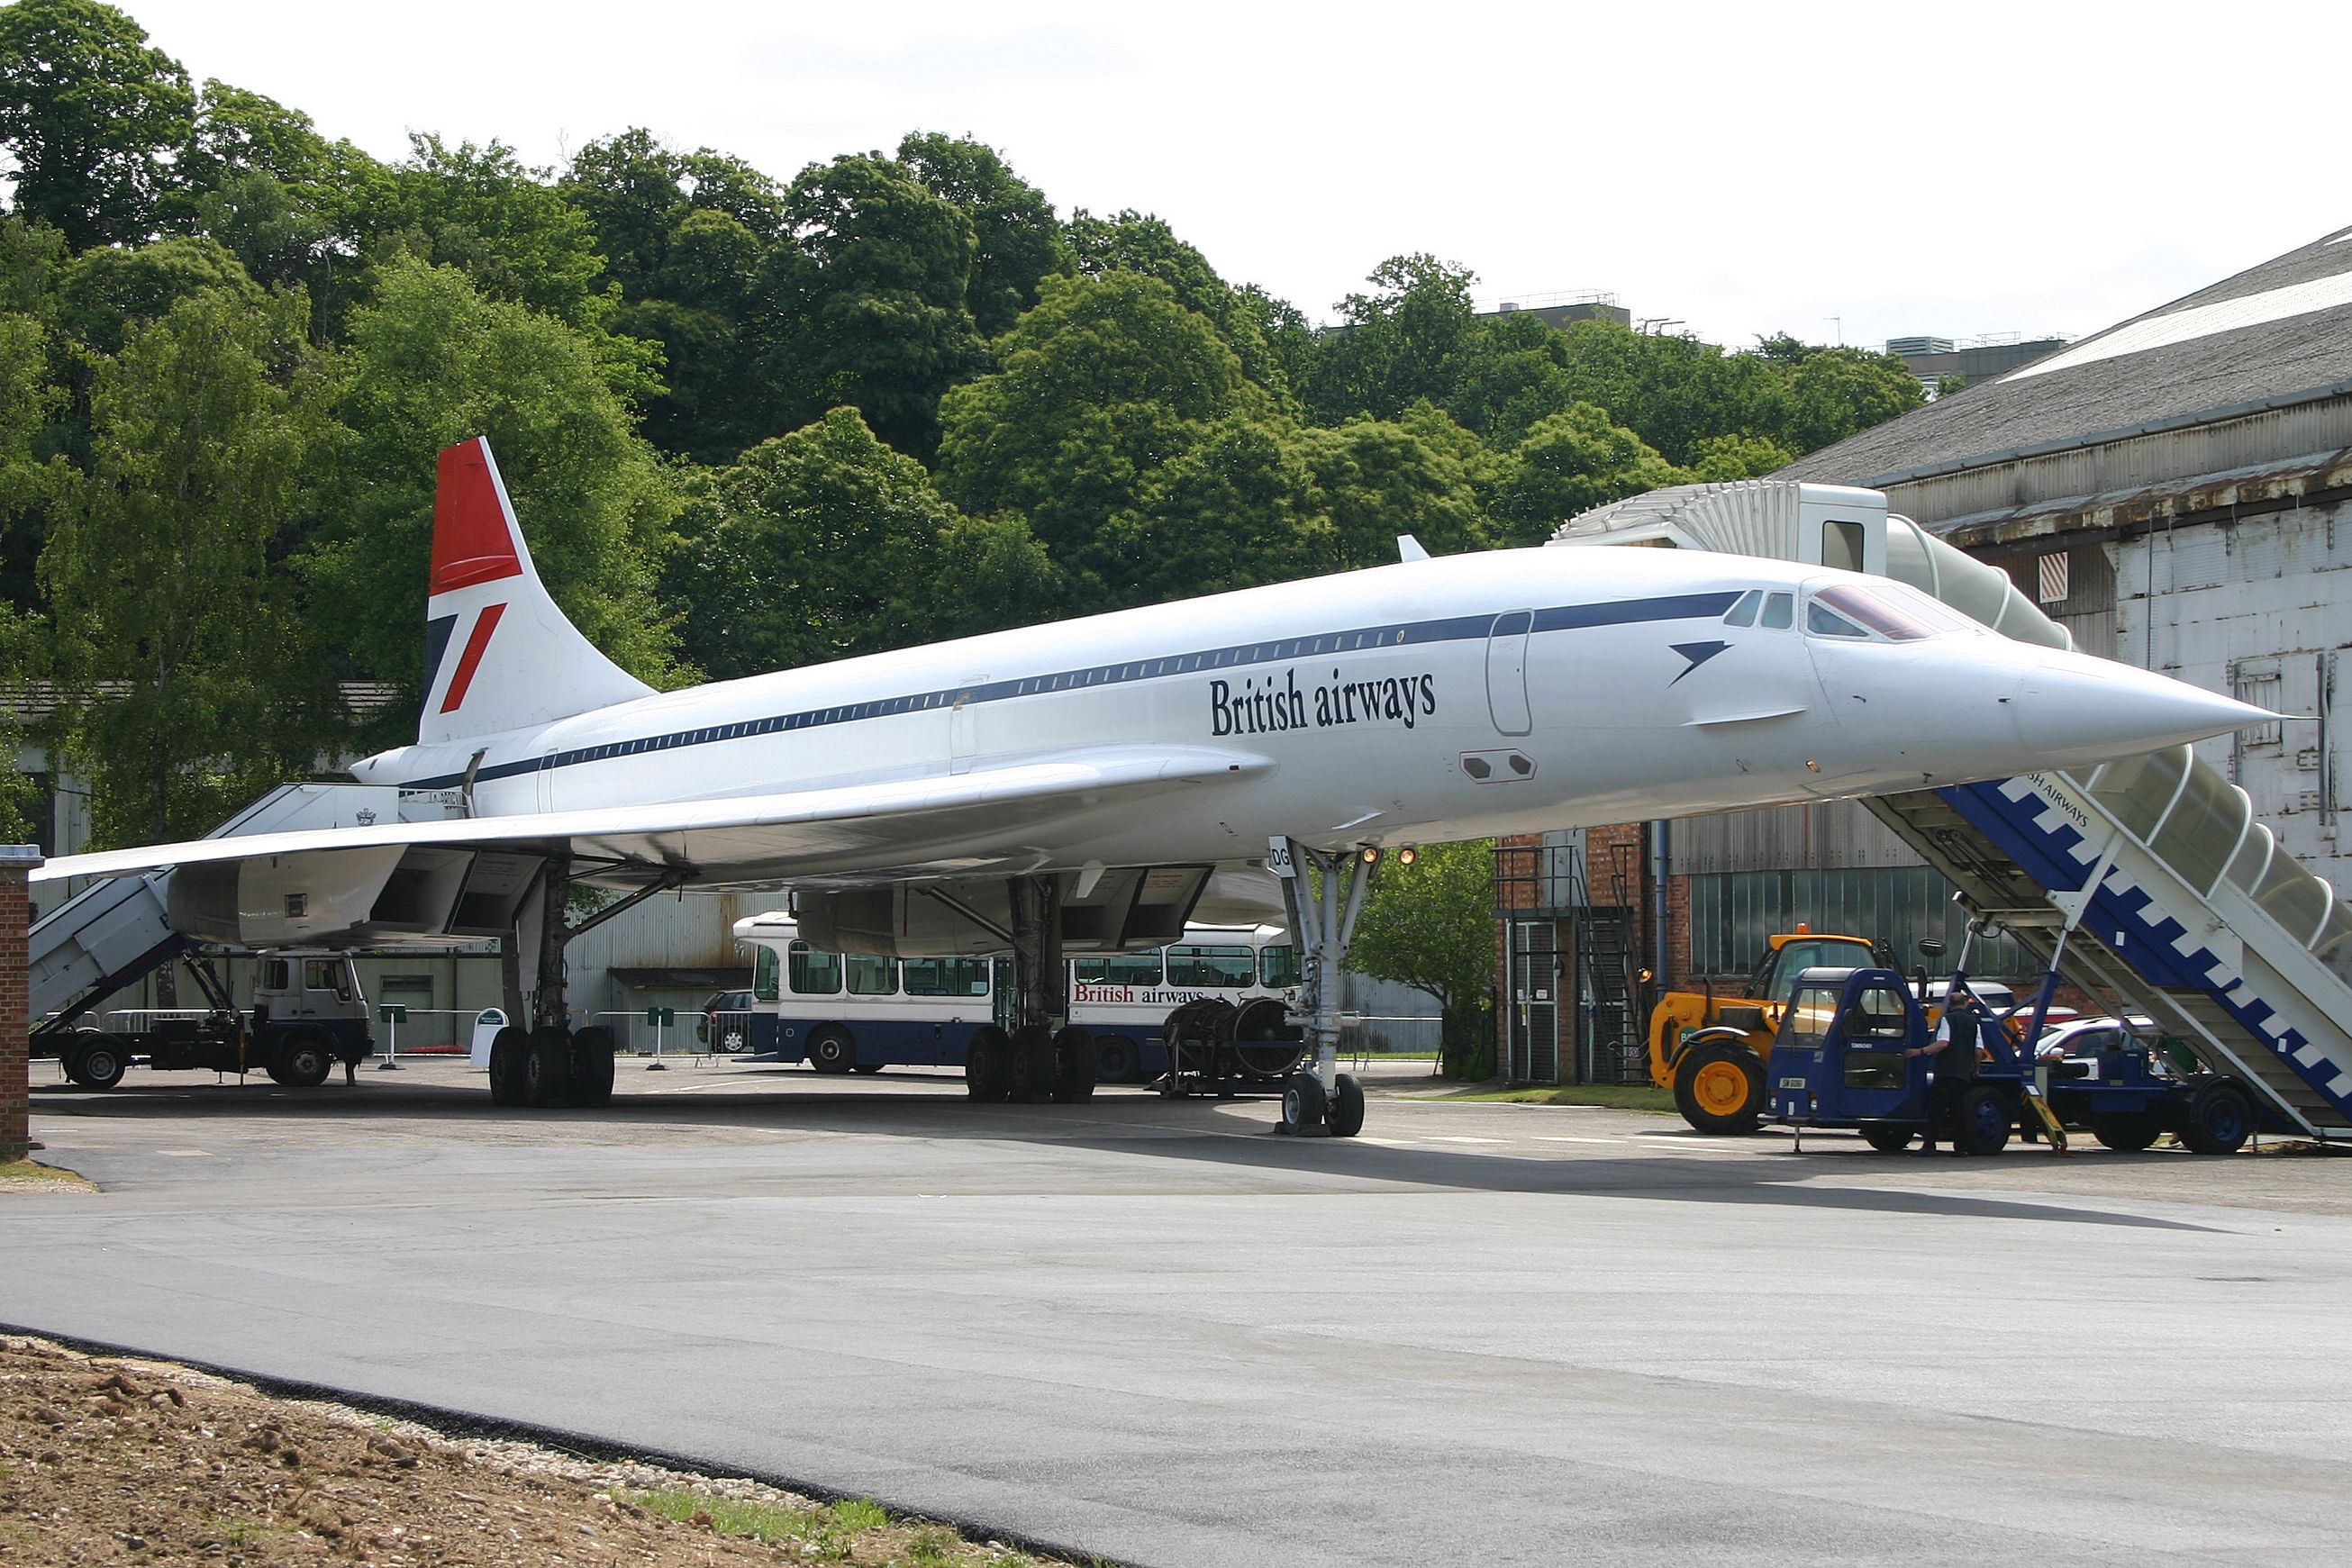 A British Airways Concorde aircraft parked on an airport apron.